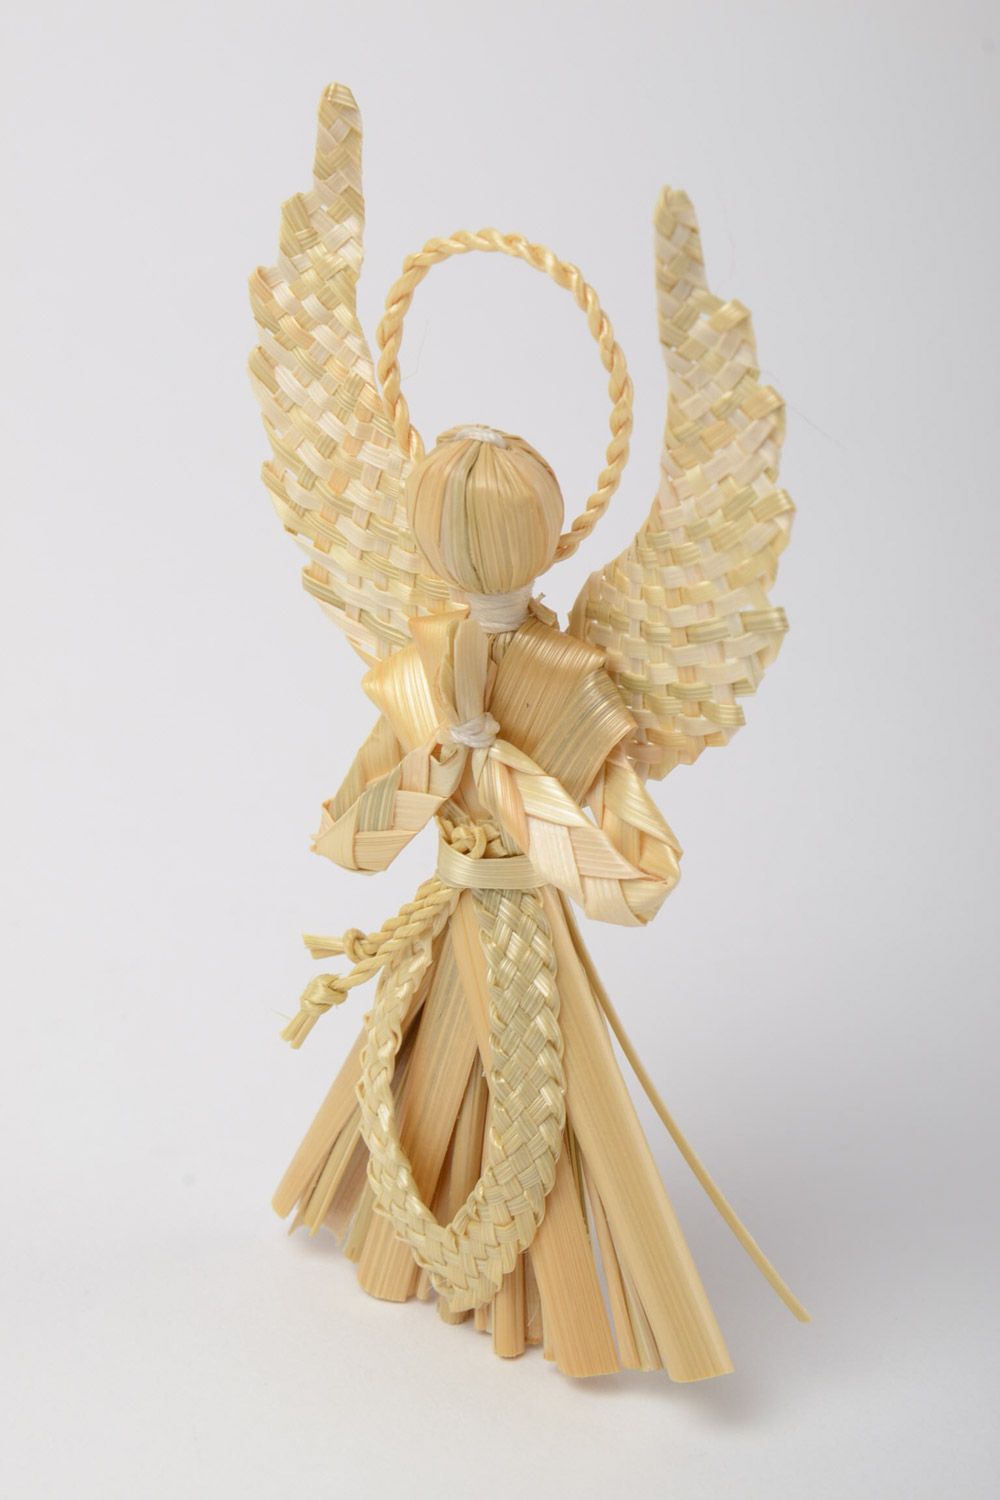 Homemade wall hanging decoration woven of straw guardian angel protective charm photo 2